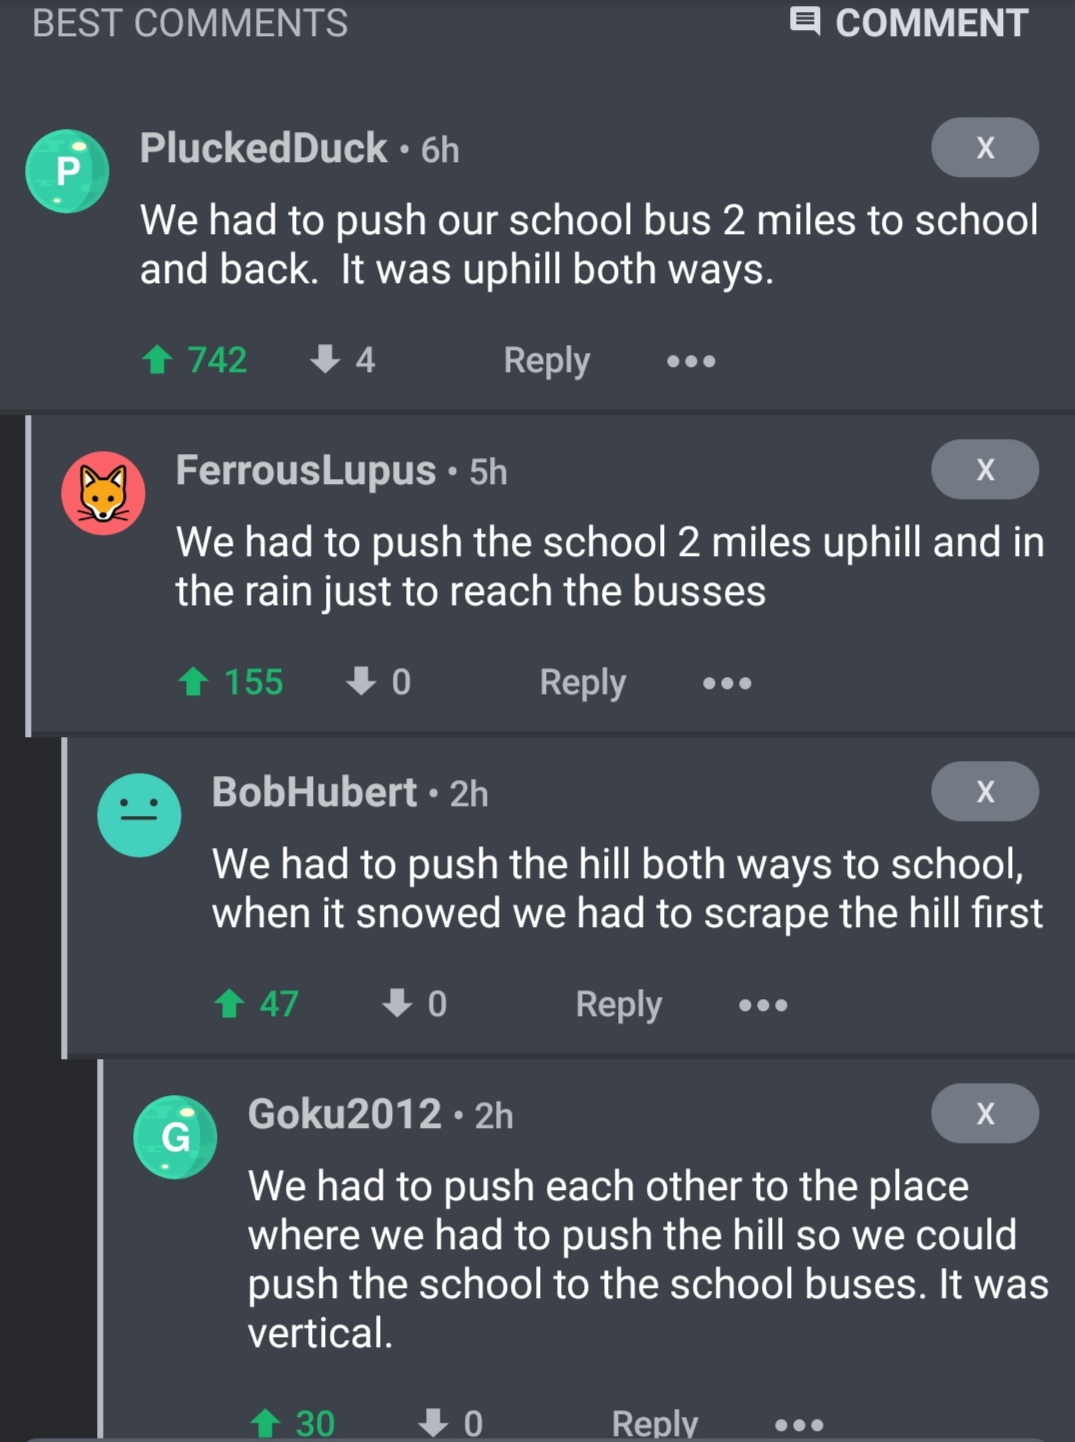 screenshot - Best E Comment PluckedDuck 6h We had to push our school bus 2 miles to school and back. It was uphill both ways. 1 742 4 ... FerrousLupus 5h We had to push the school 2 miles uphill and in the rain just to reach the busses 1 155 0 ... BobHube